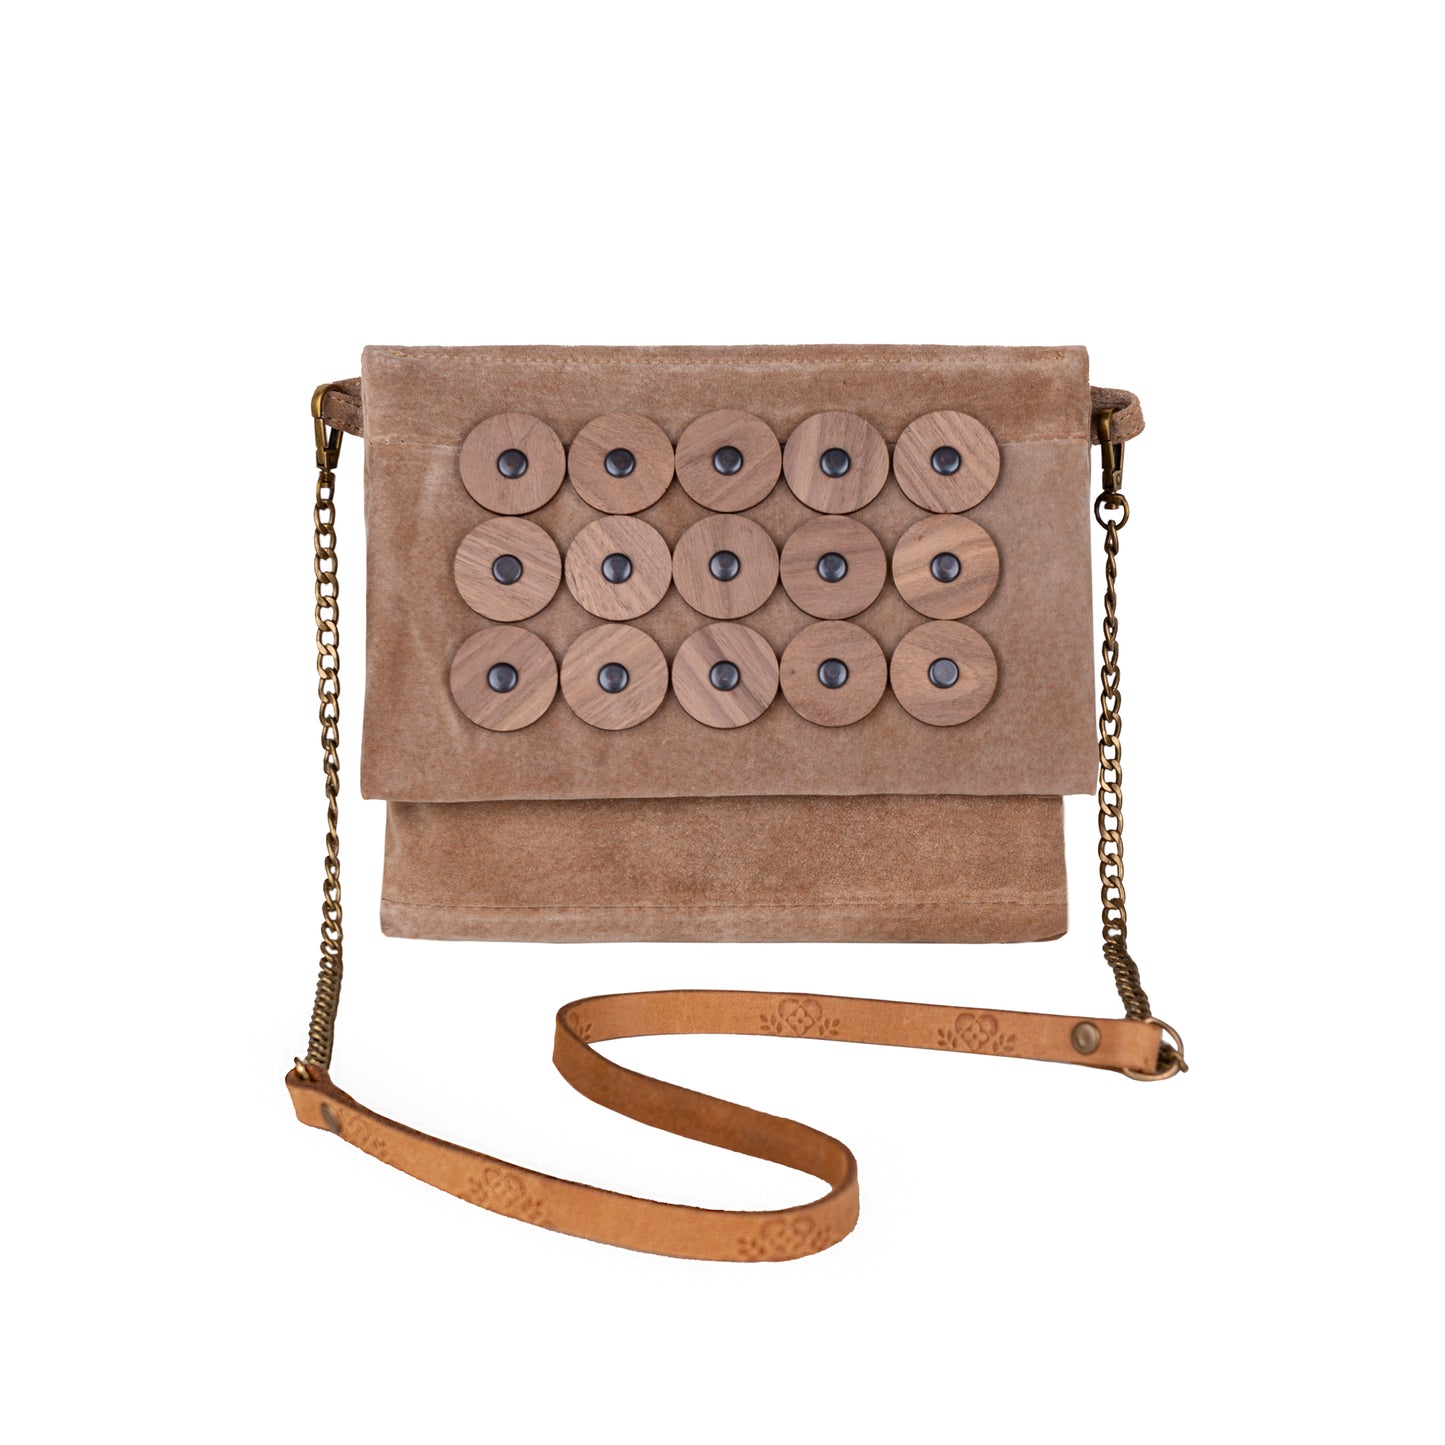 METANoIA tan recycled leather small handbag with circle bamboo and walnut acrylic forms fashioned into a repeative fashion with a smaller circle overlay on each form. 